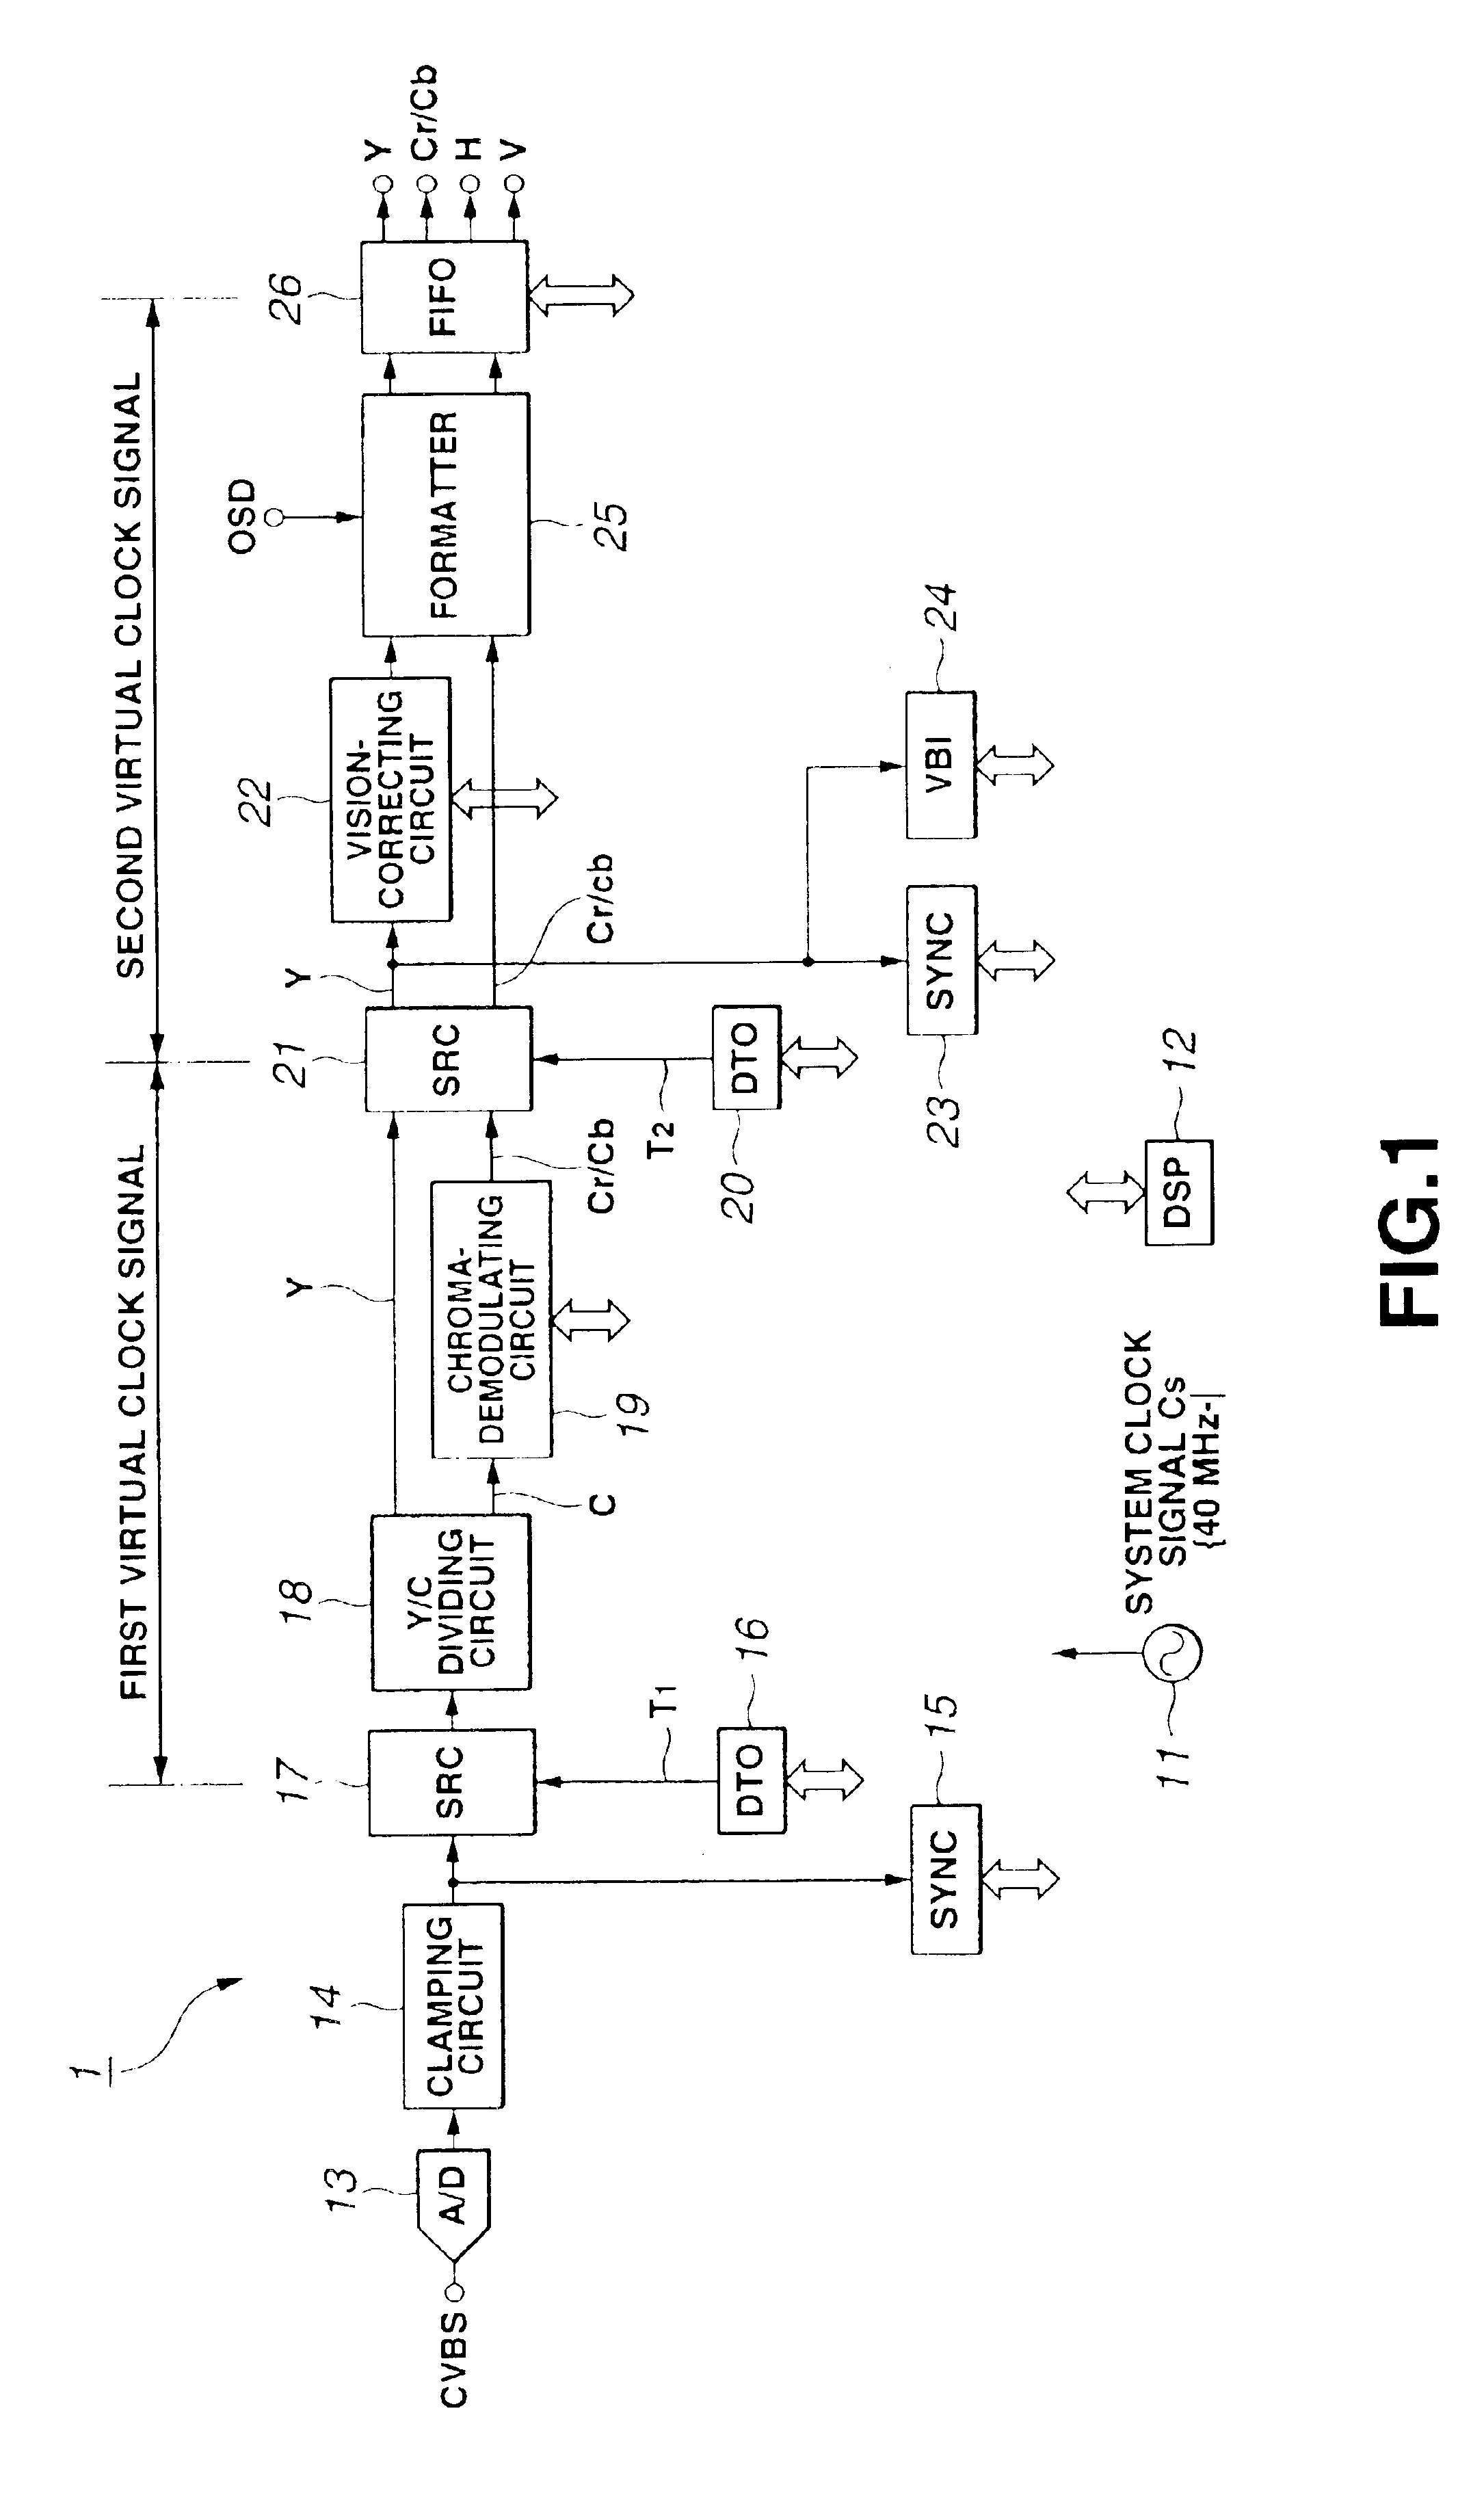 Video processing apparatus for converting composite video signals to digital component video signals